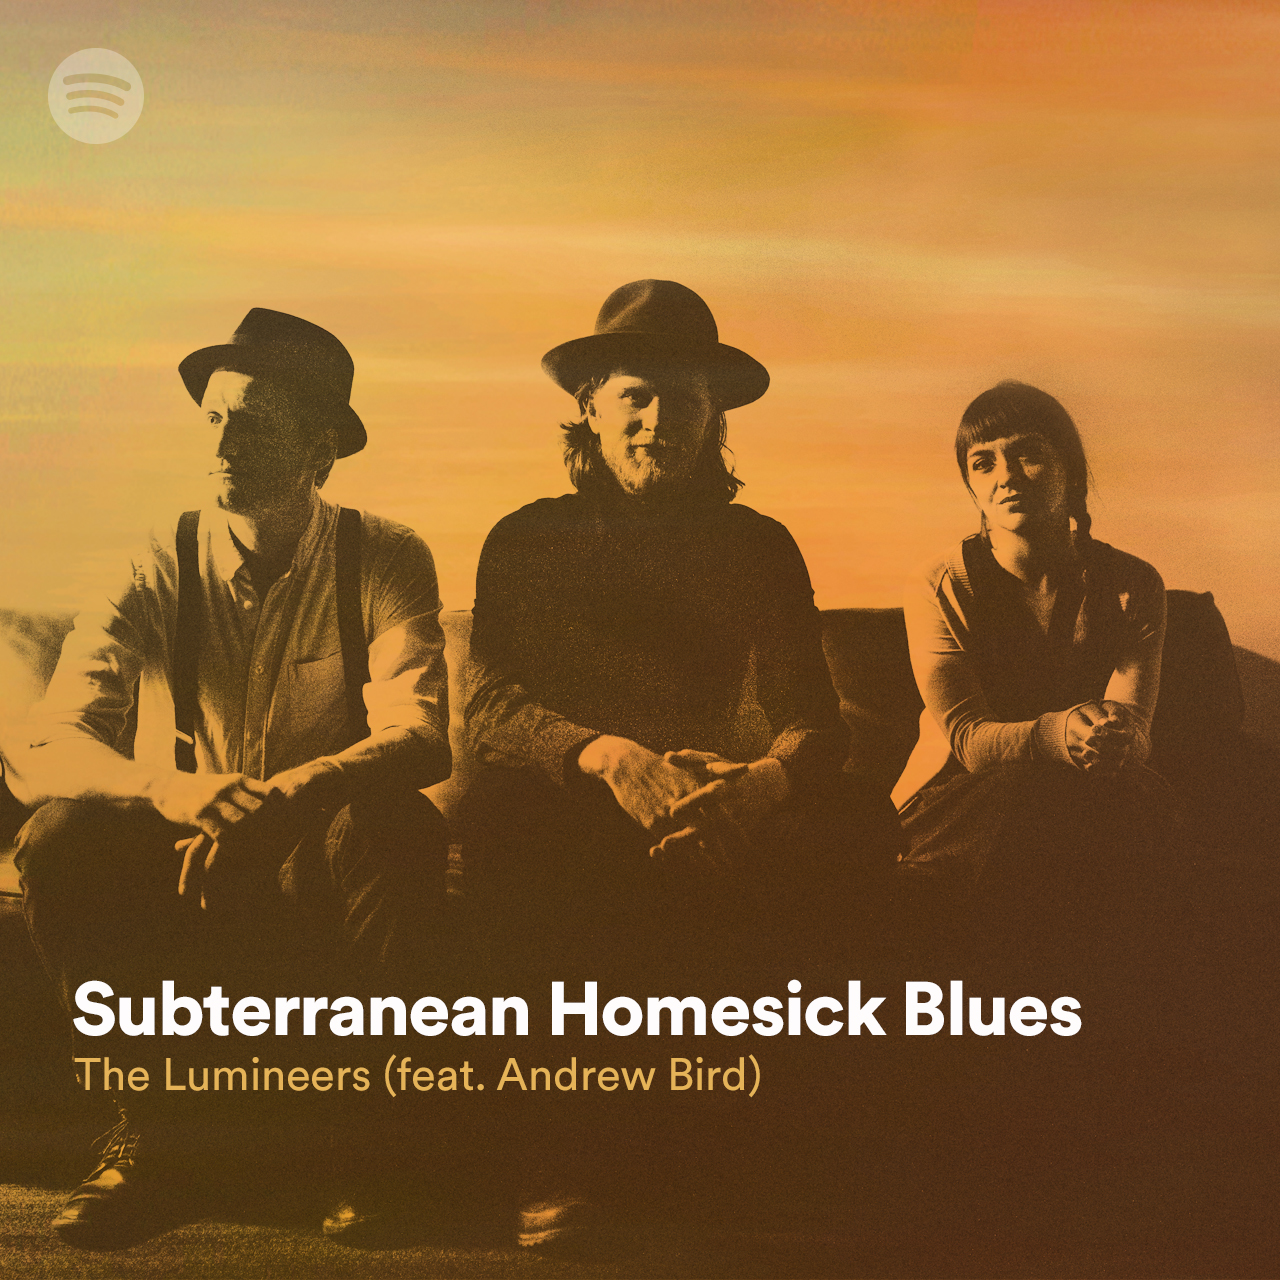 A promotional image of the band The Lumineers with the text "Subterranean Homesick Blues - The Lumineers feat. Andrew Bird" overlaid.